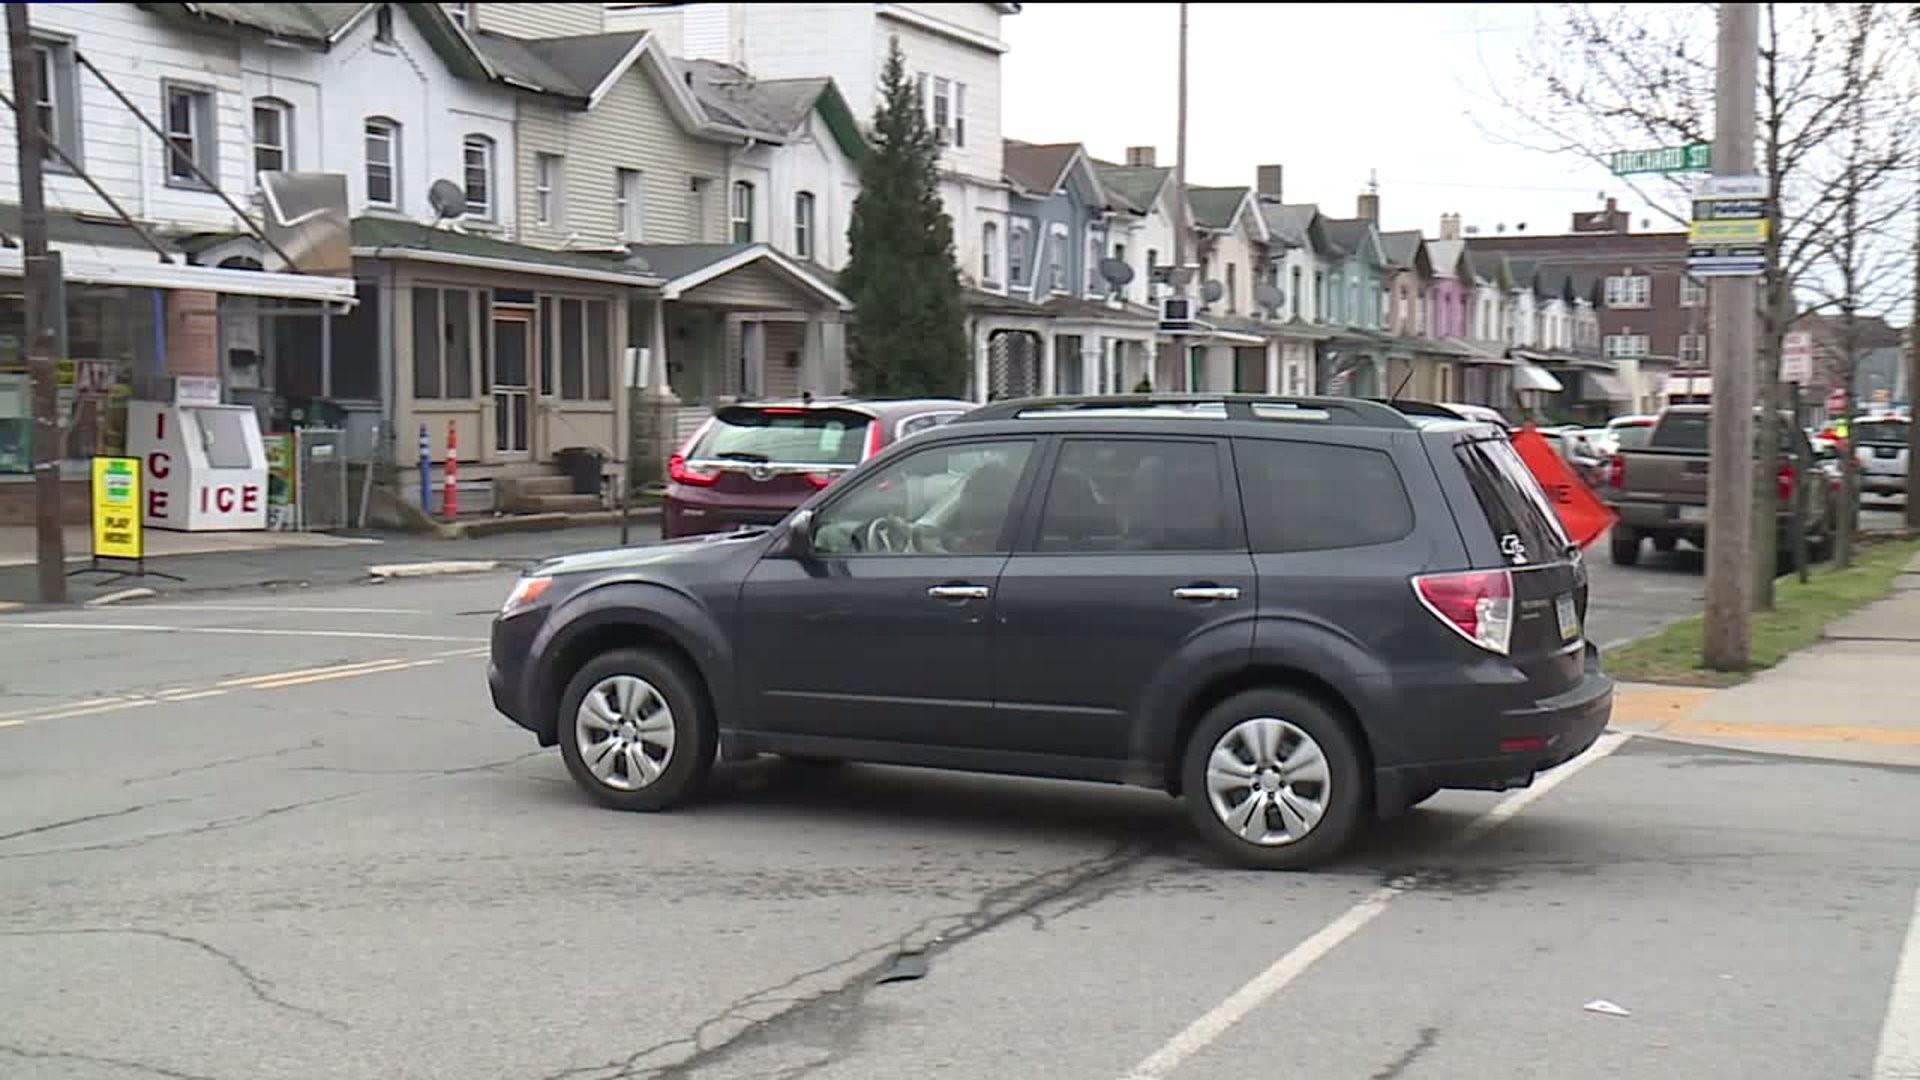 Residents Concerned About Scranton Intersection